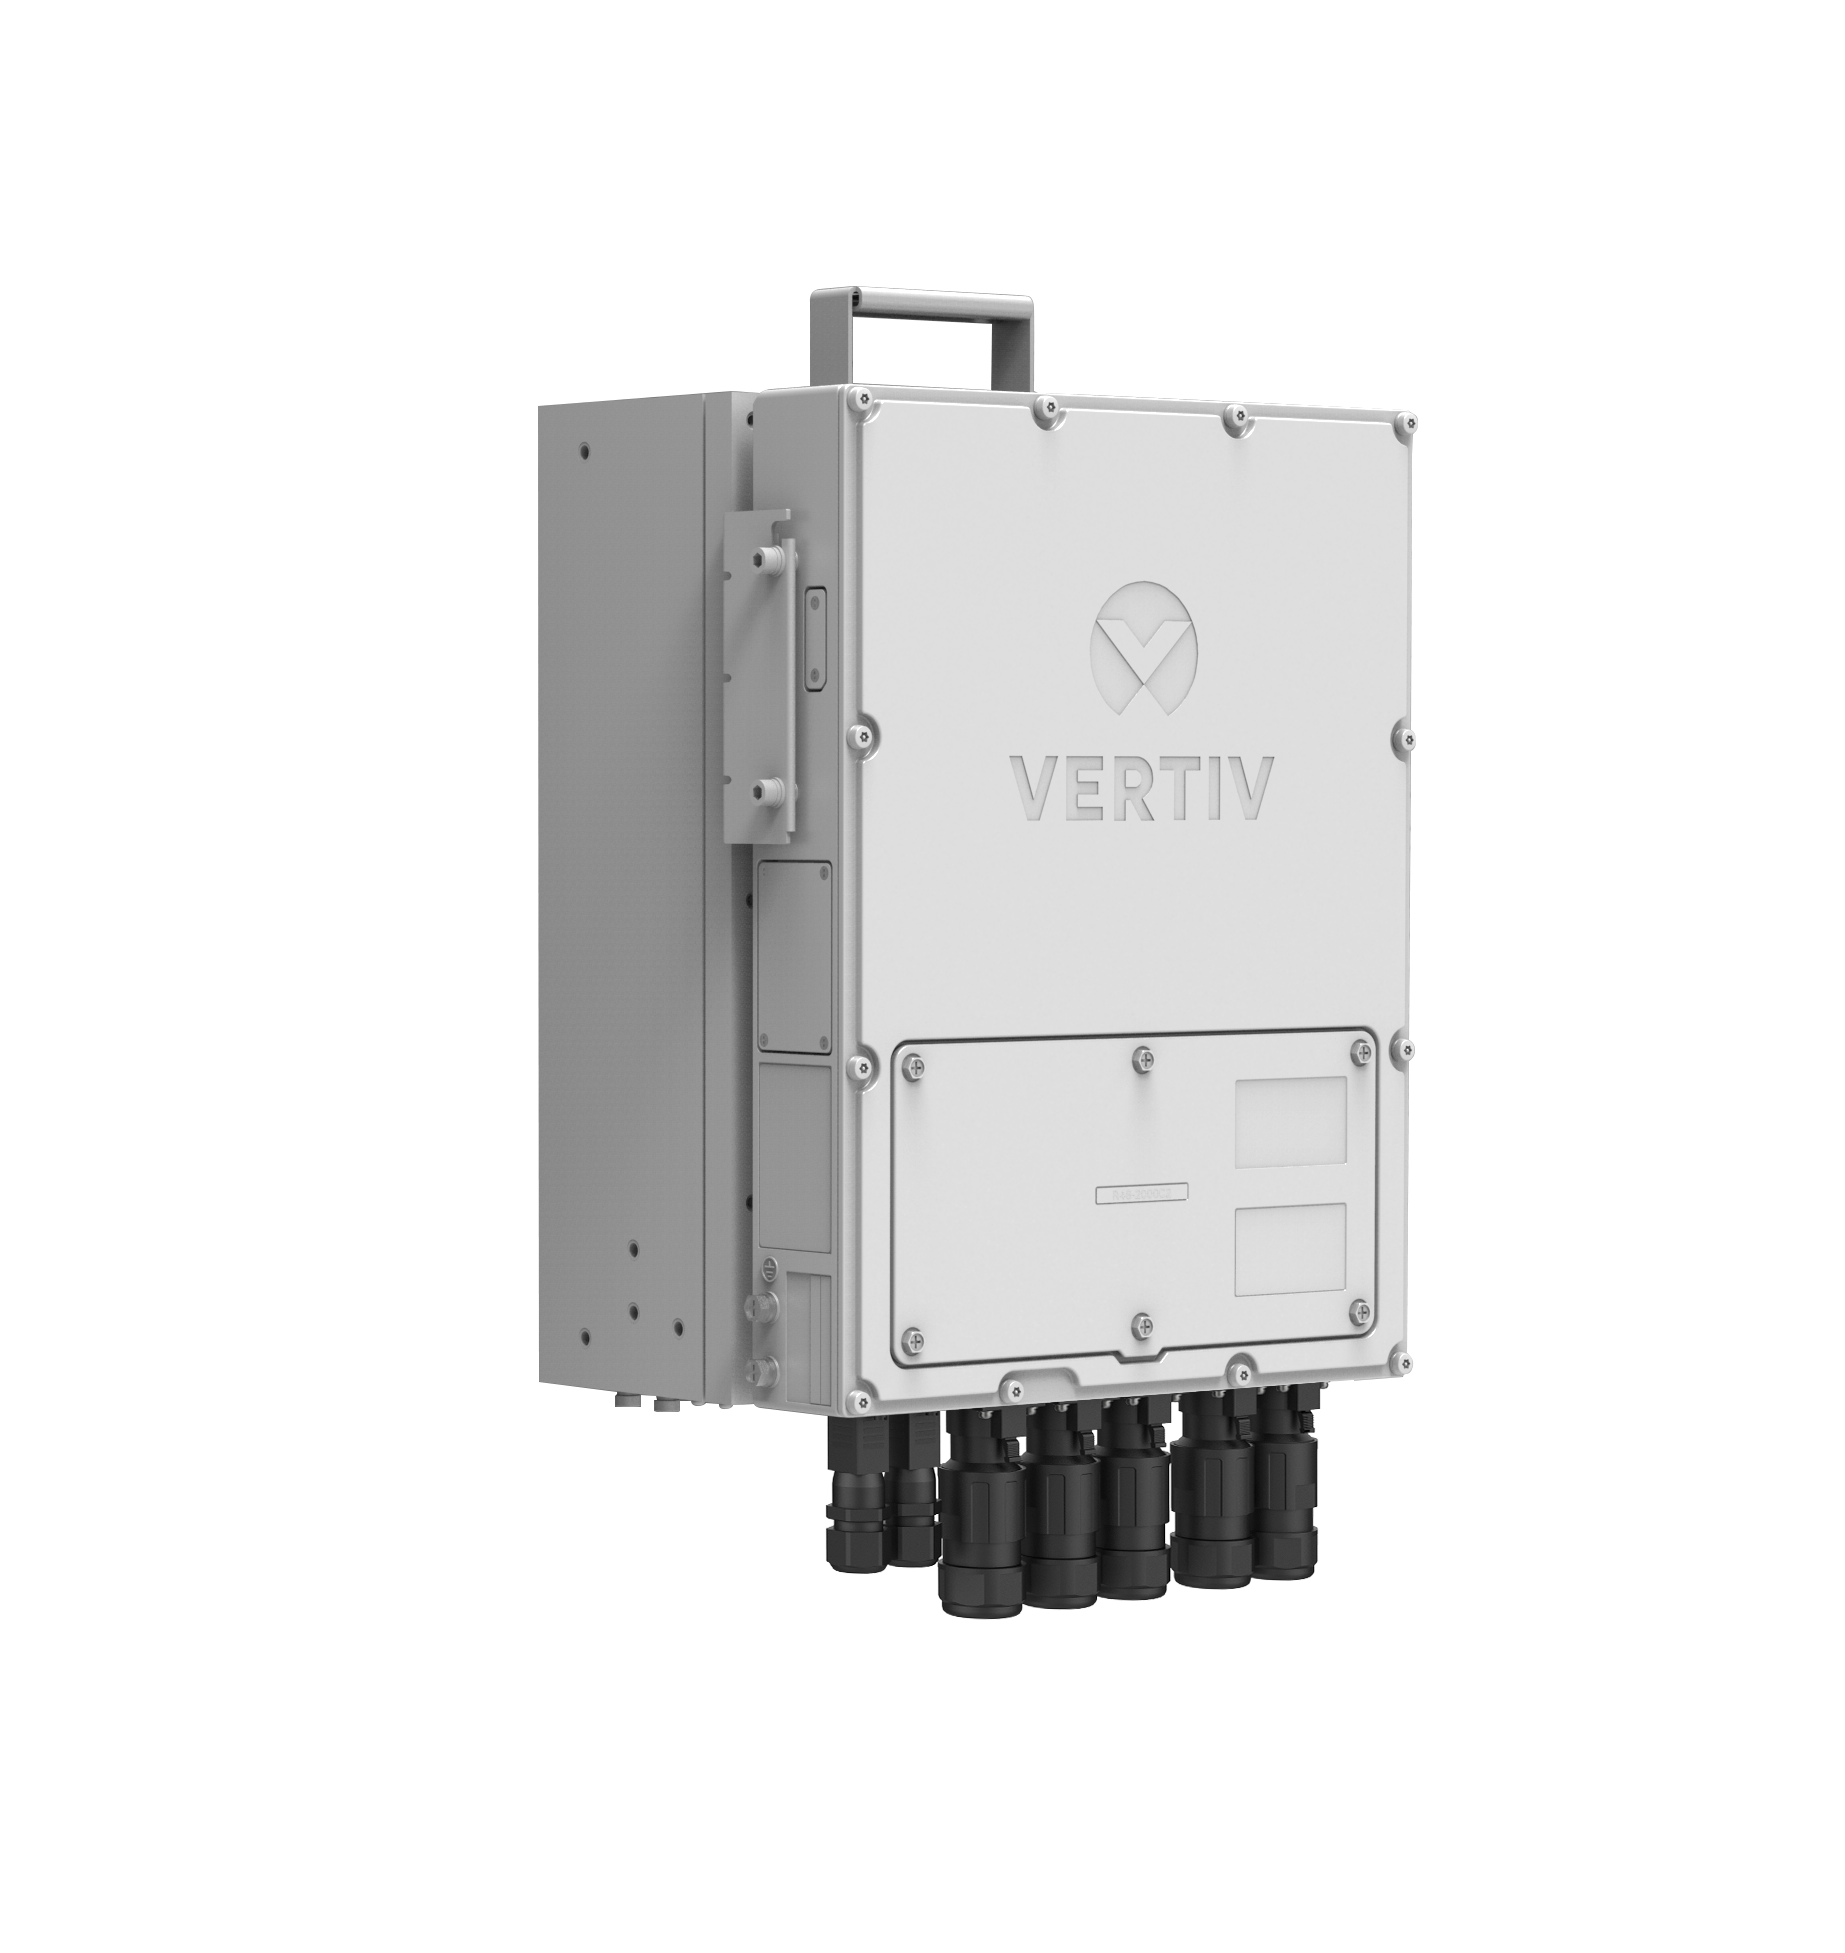  Vertiv Powers Cell Sites and 5G Radio Networks with New Compact Outdoor Rectifier and Lion Battery